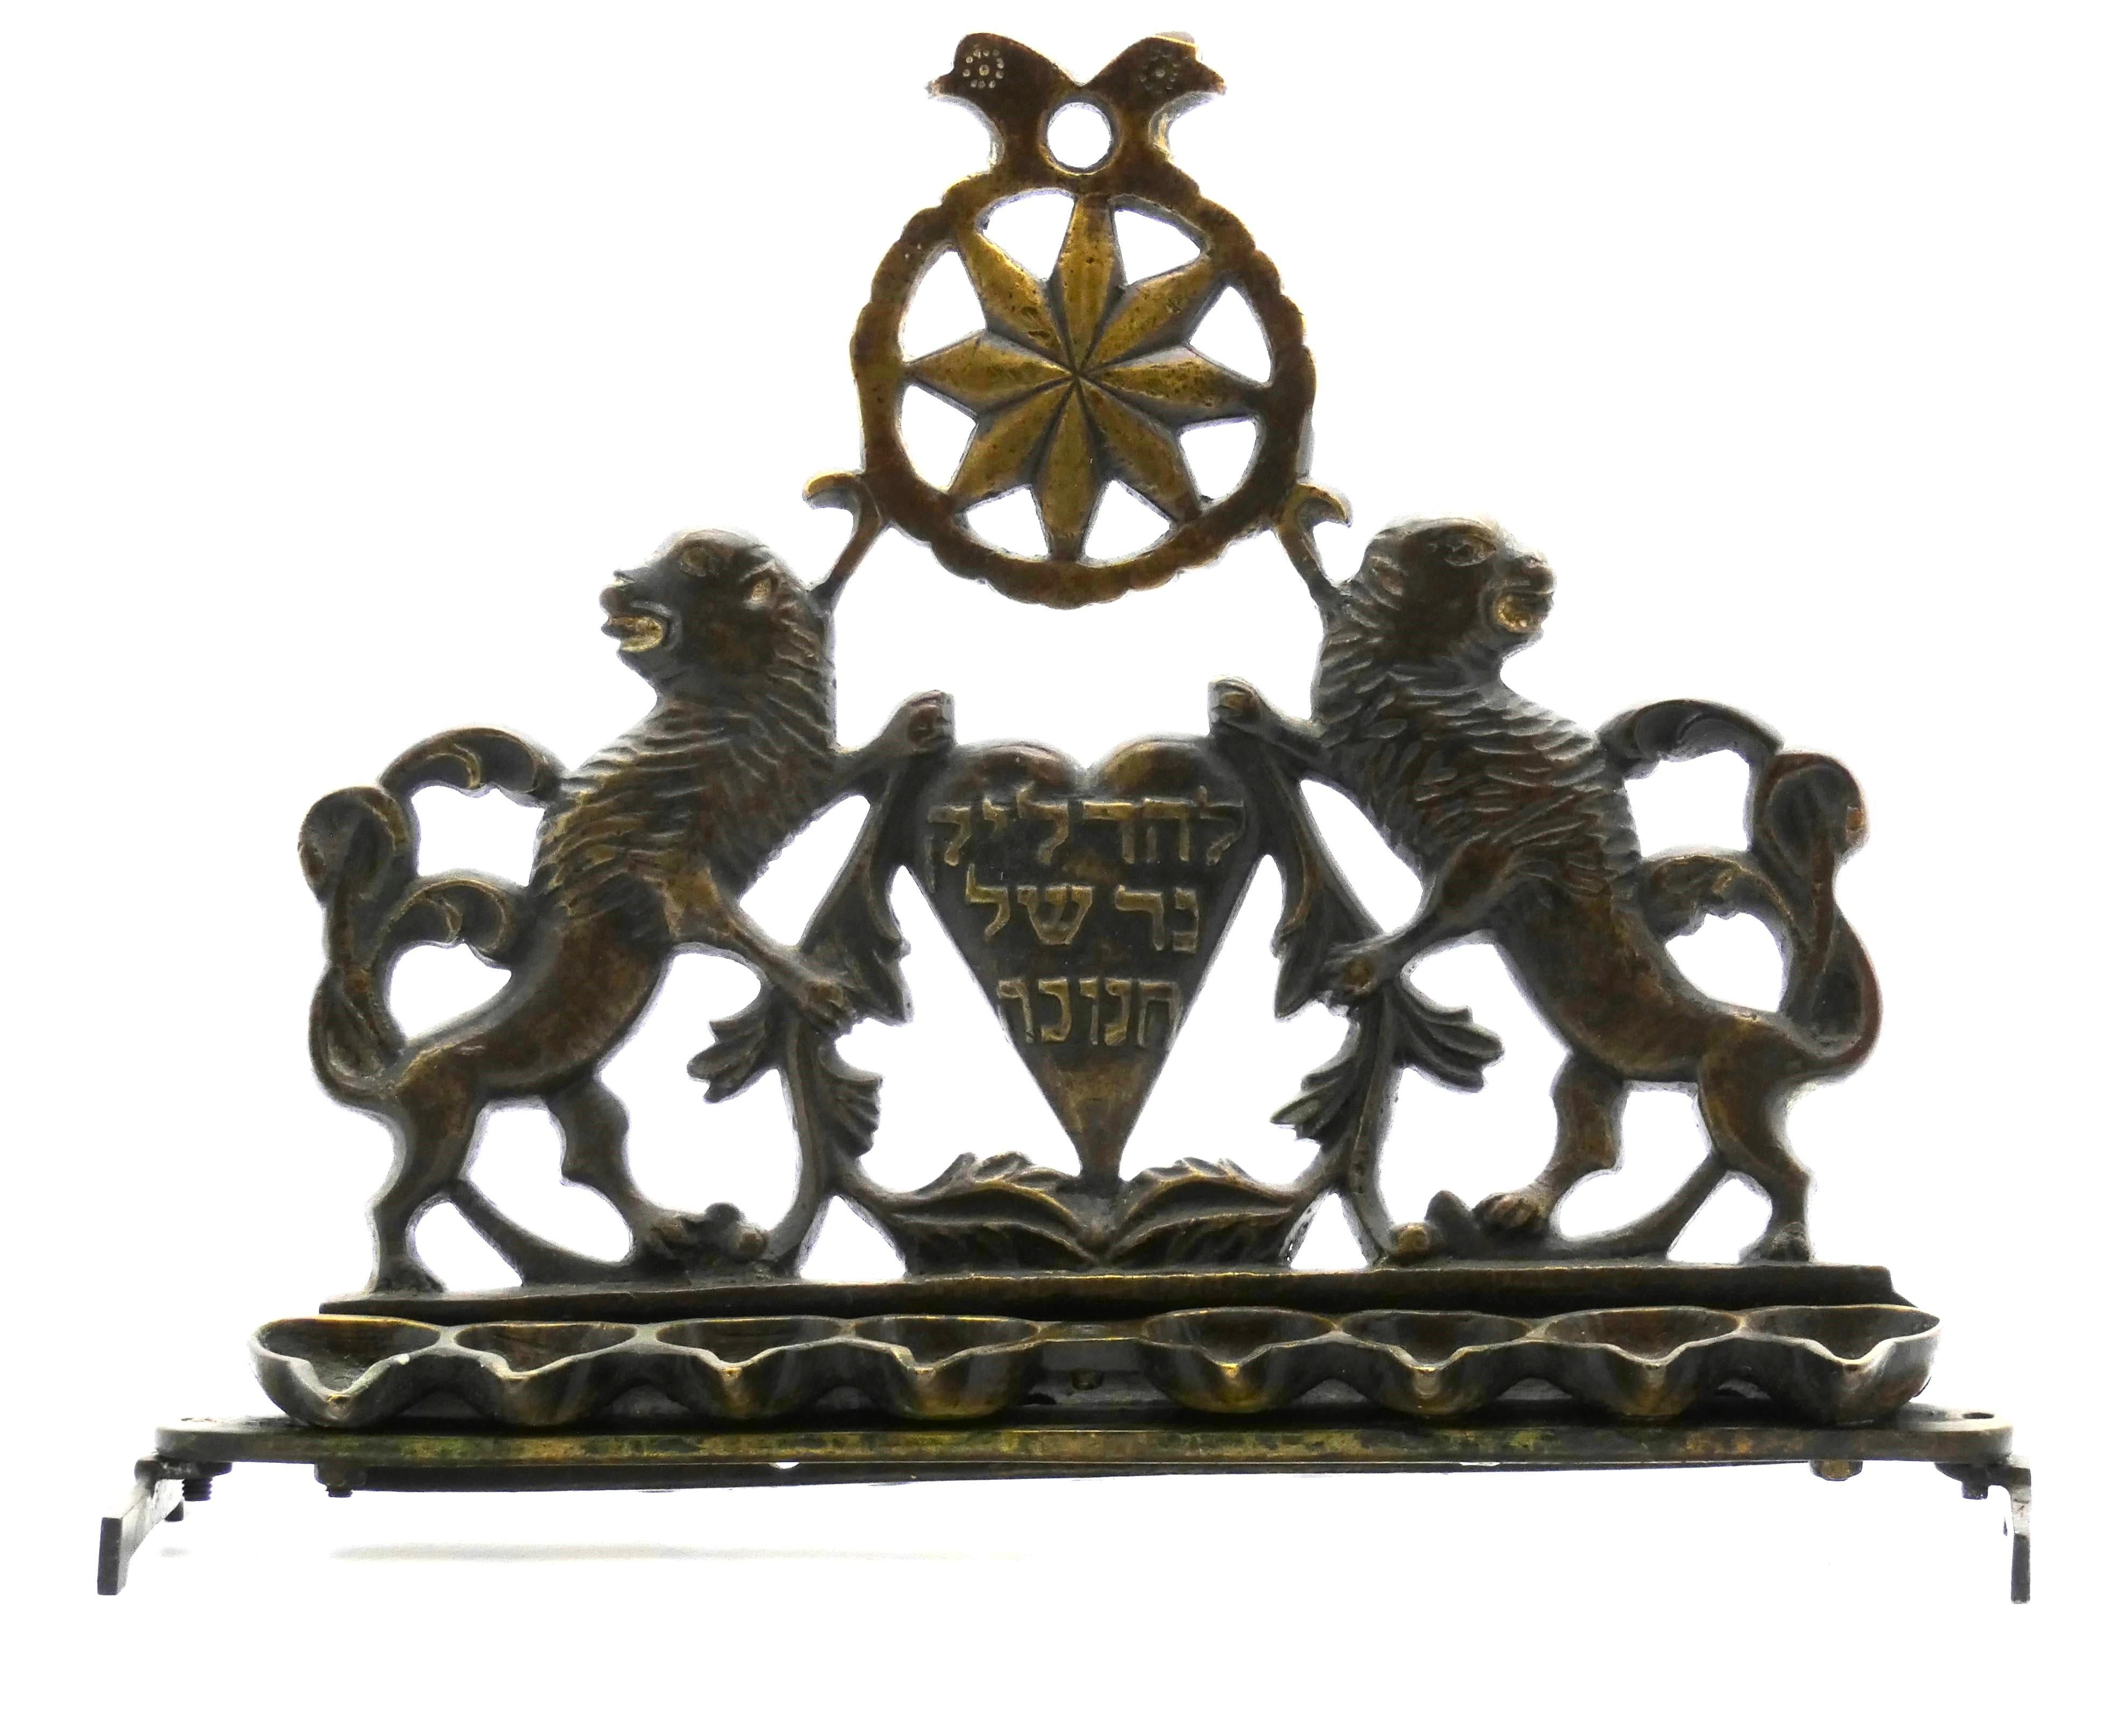 This spectacular Hanukkah lamp is ornately fashioned with a cast backplate featuring a heart shape at center flanked by two rampant Lions of Judah fiercely facing away from one another clutching flowing foliate branches. 

These magnificent lions